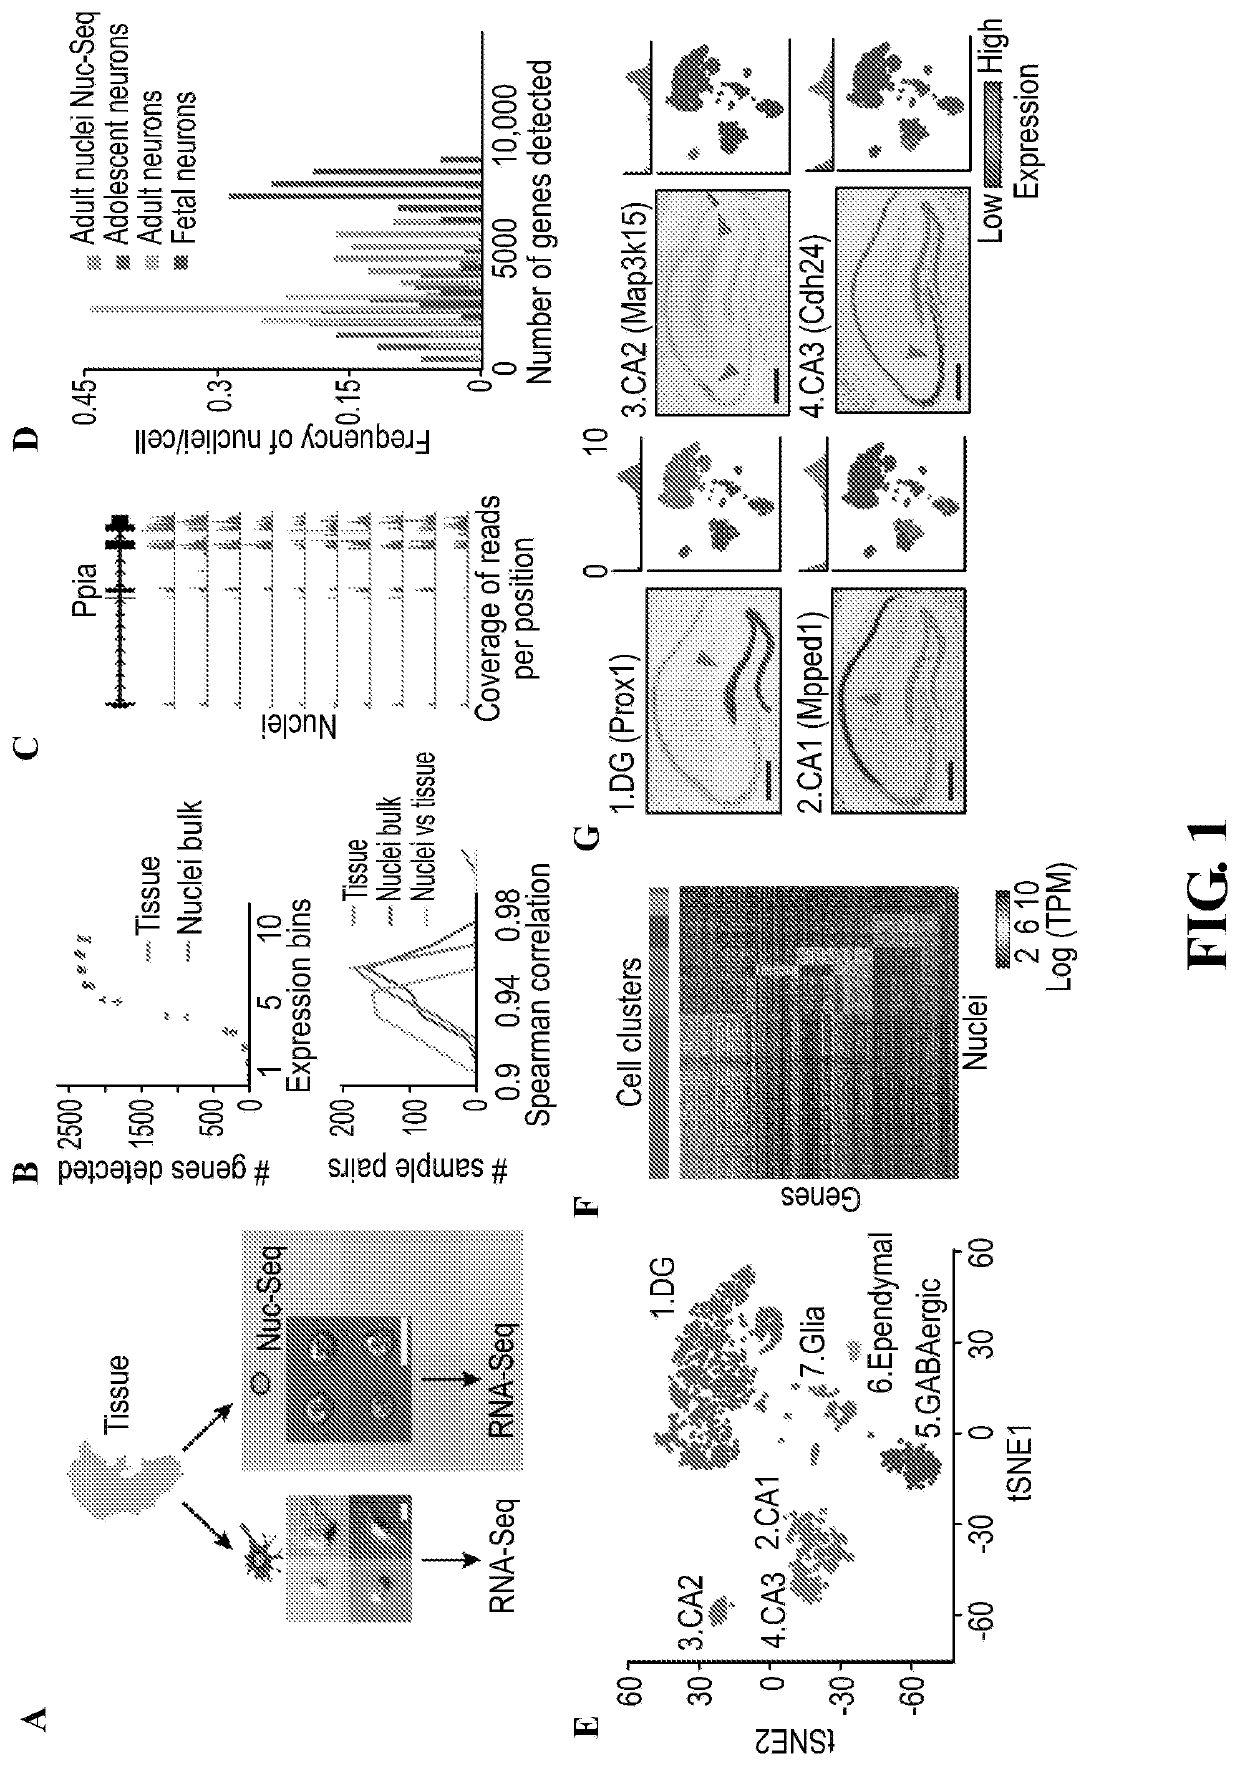 Methods for determining spatial and temporal gene expression dynamics during adult neurogenesis in single cells